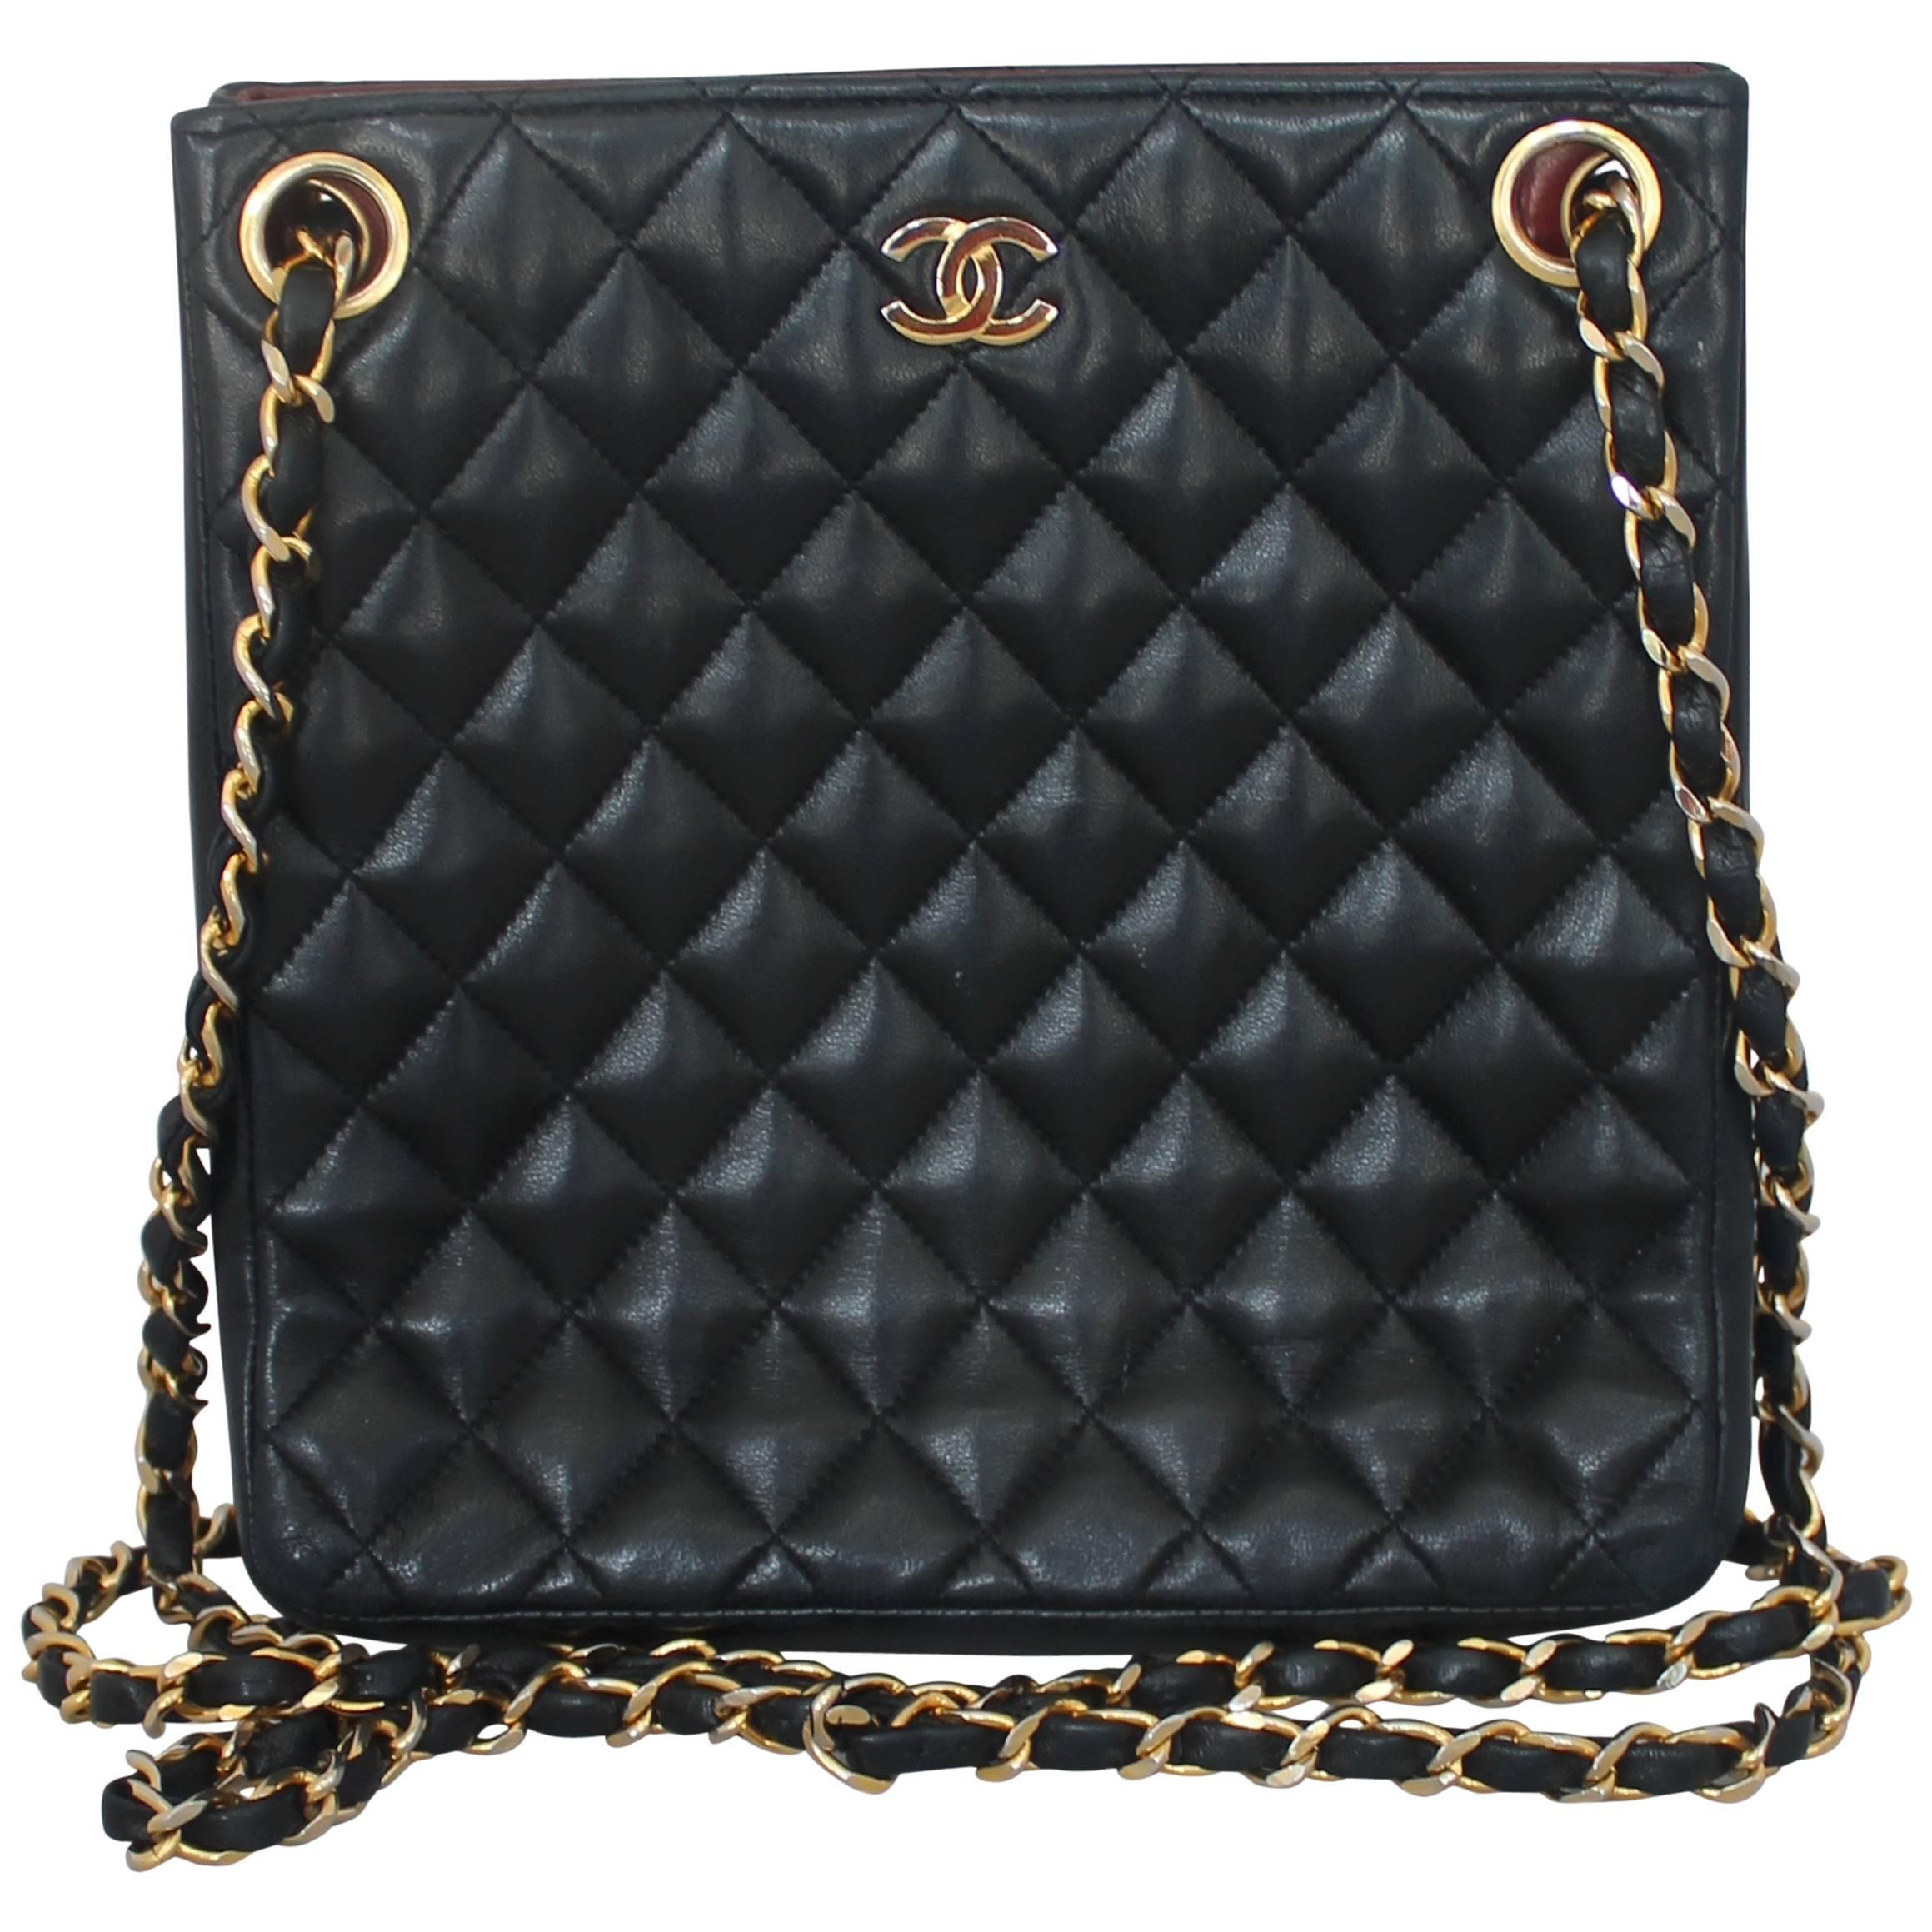 Chanel Vintage Black Quilted Lambskin Tall Handbag GHW - circa early 1980's